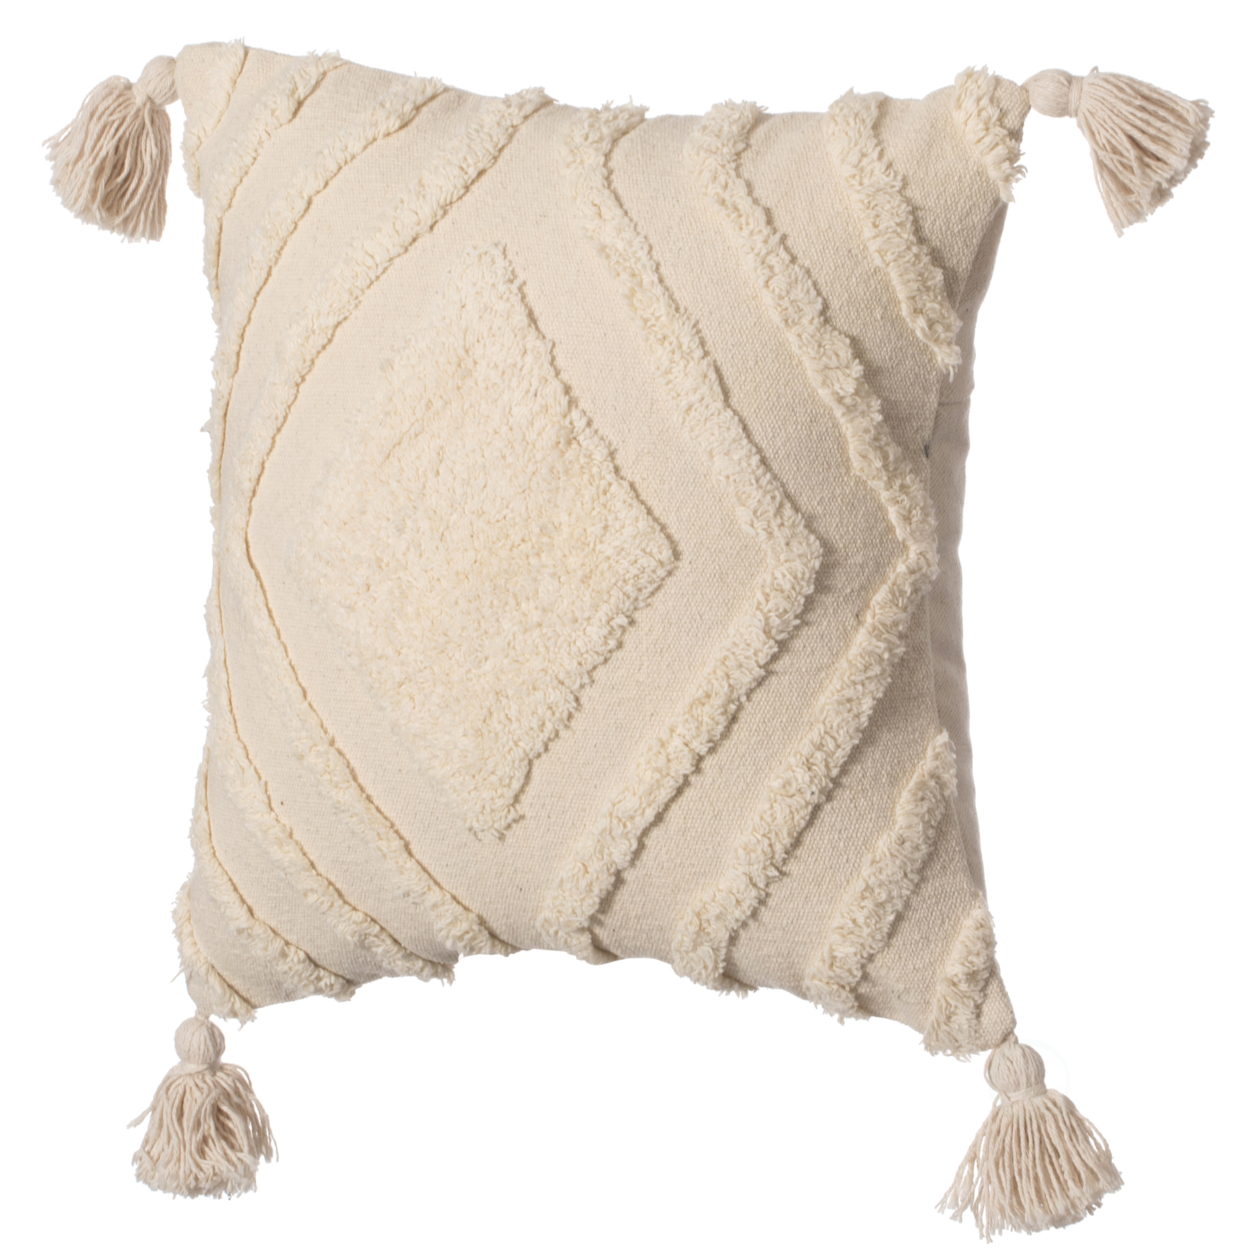 16 Handwoven Cotton Throw Pillow Cover With White On White Tufted Design And Tassel Corners - Chevron With Cushion